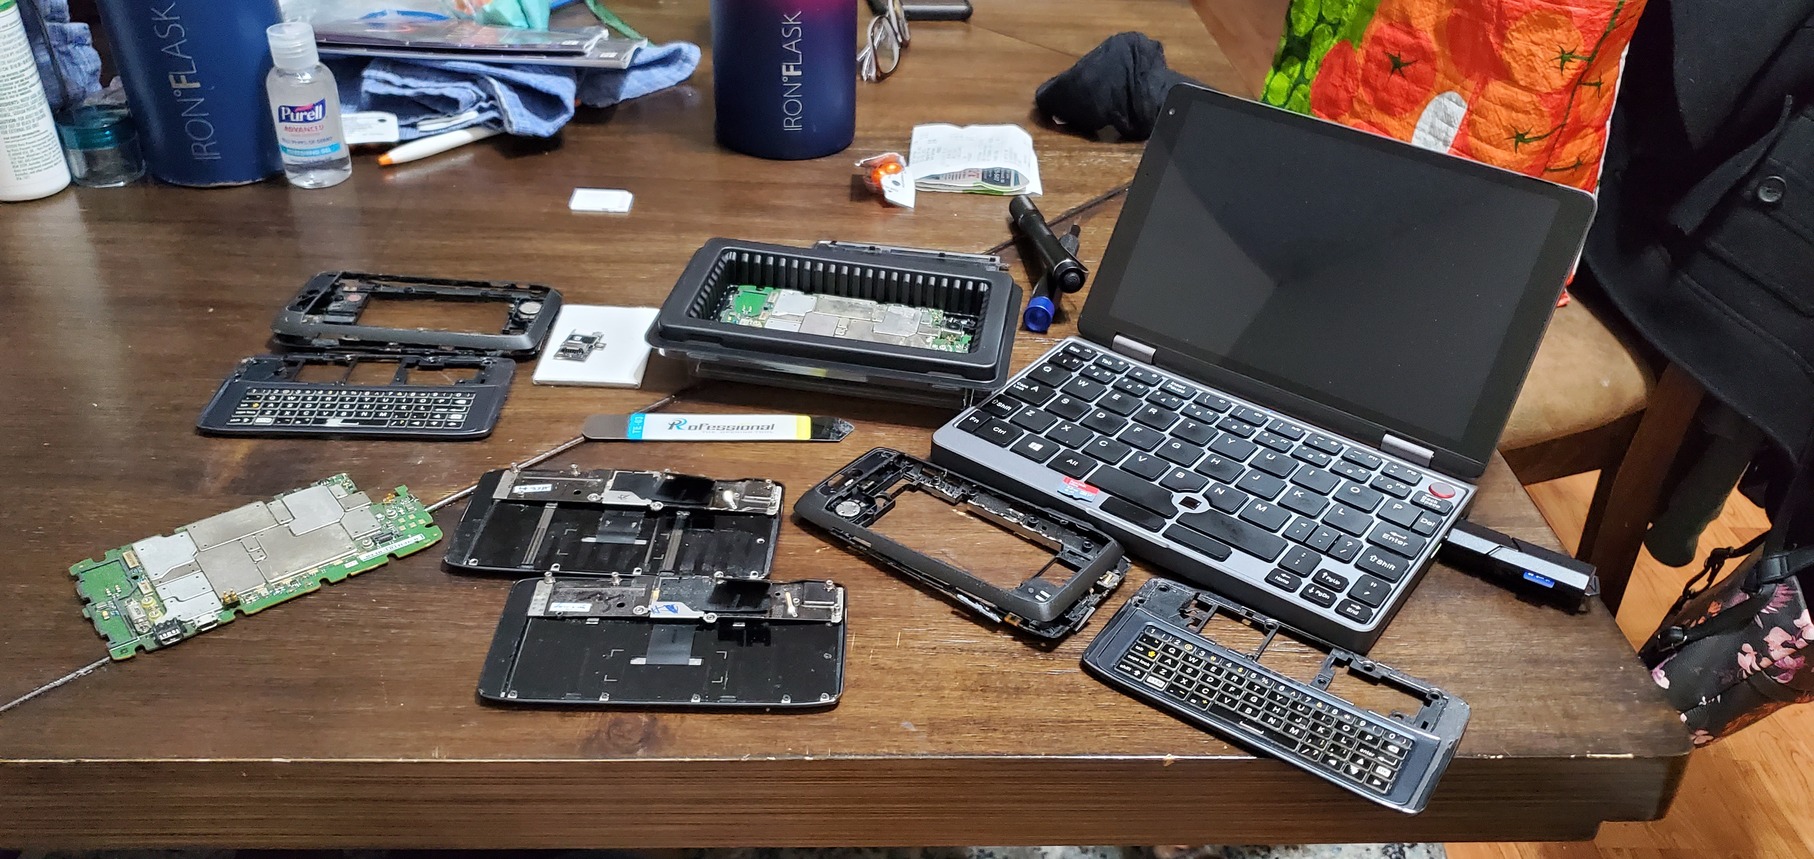 Performing open motherboard surgery on a messy table